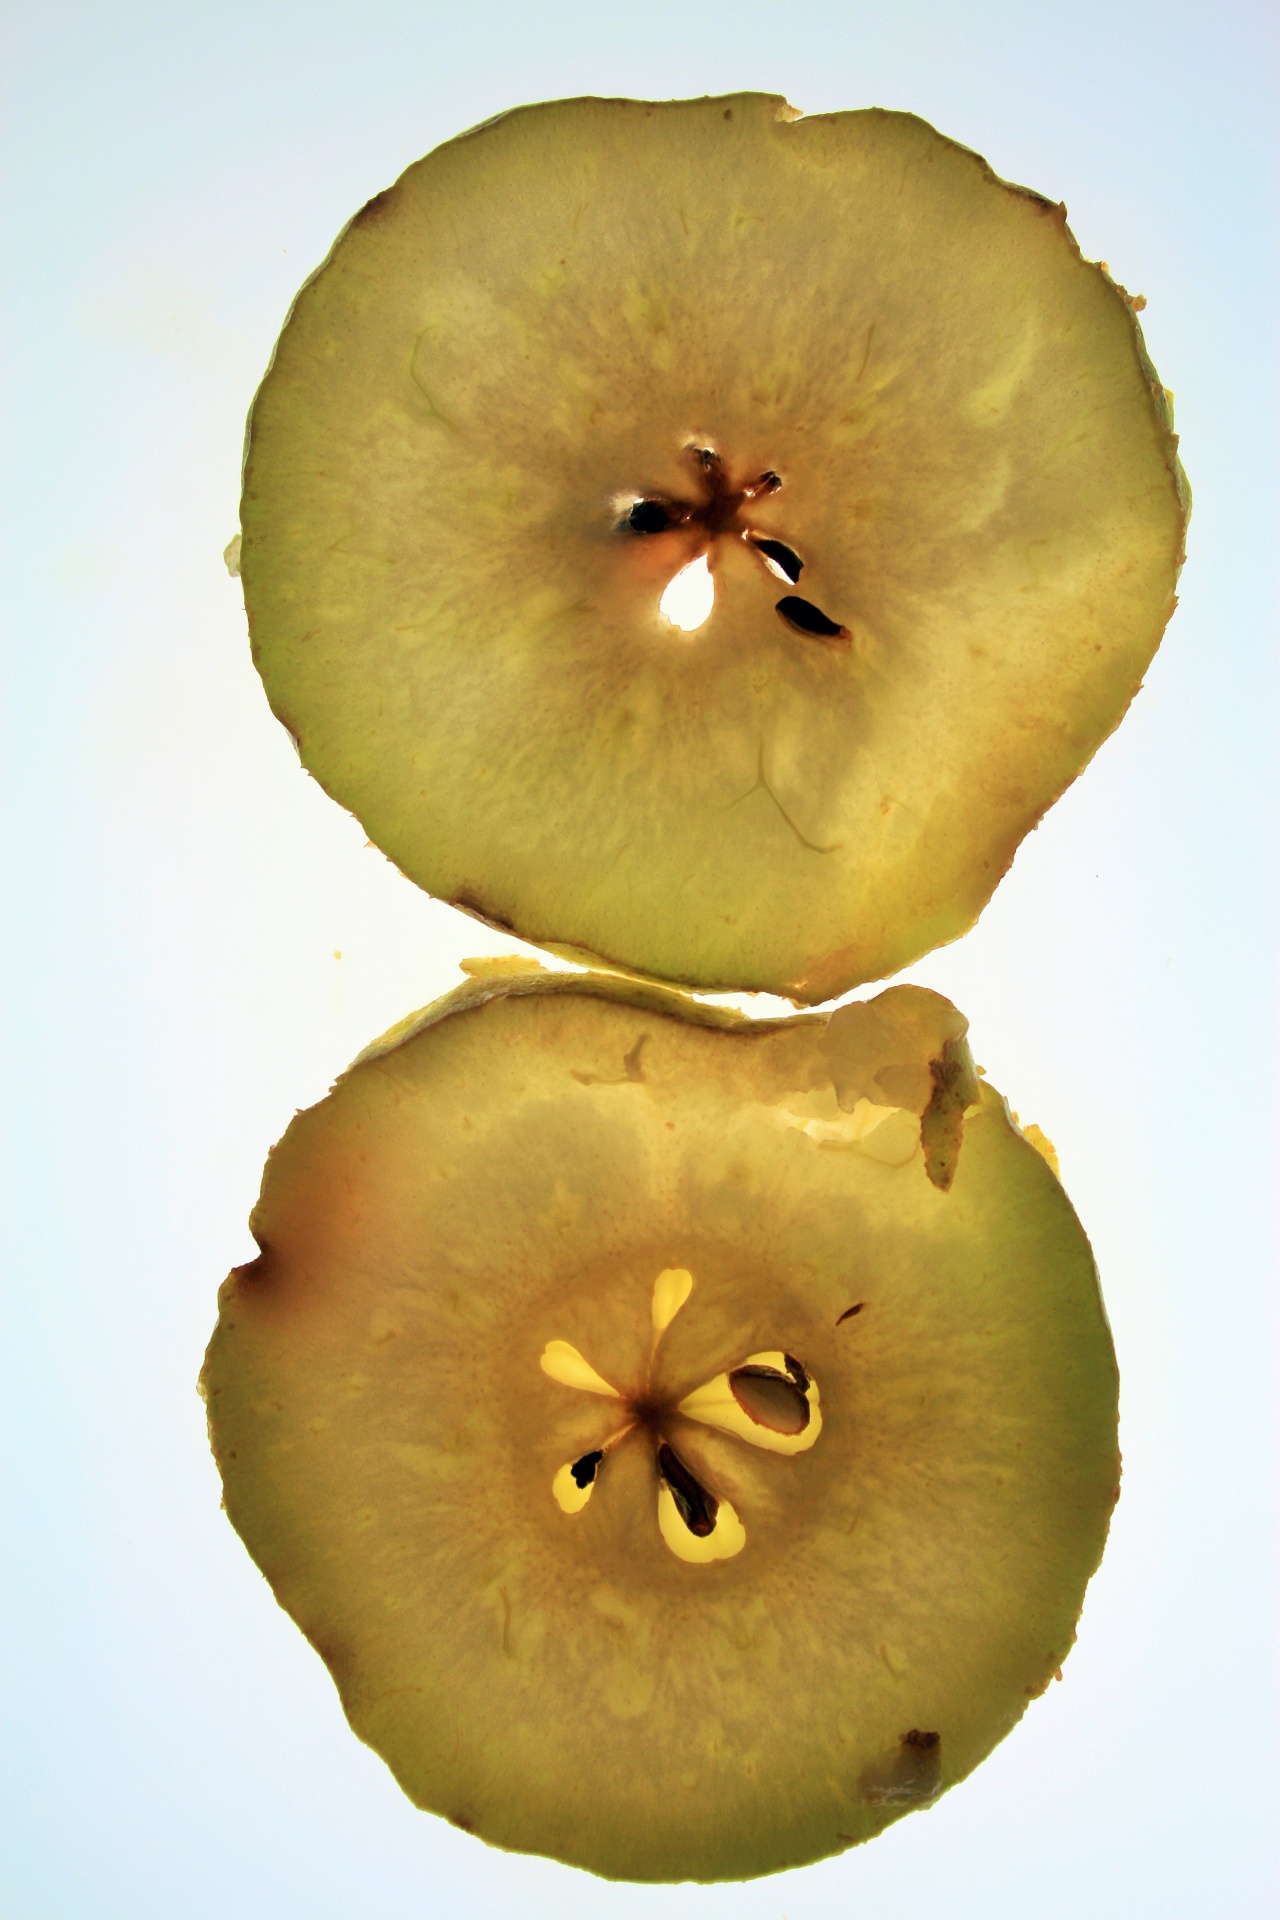 Pear Slices On Backlight